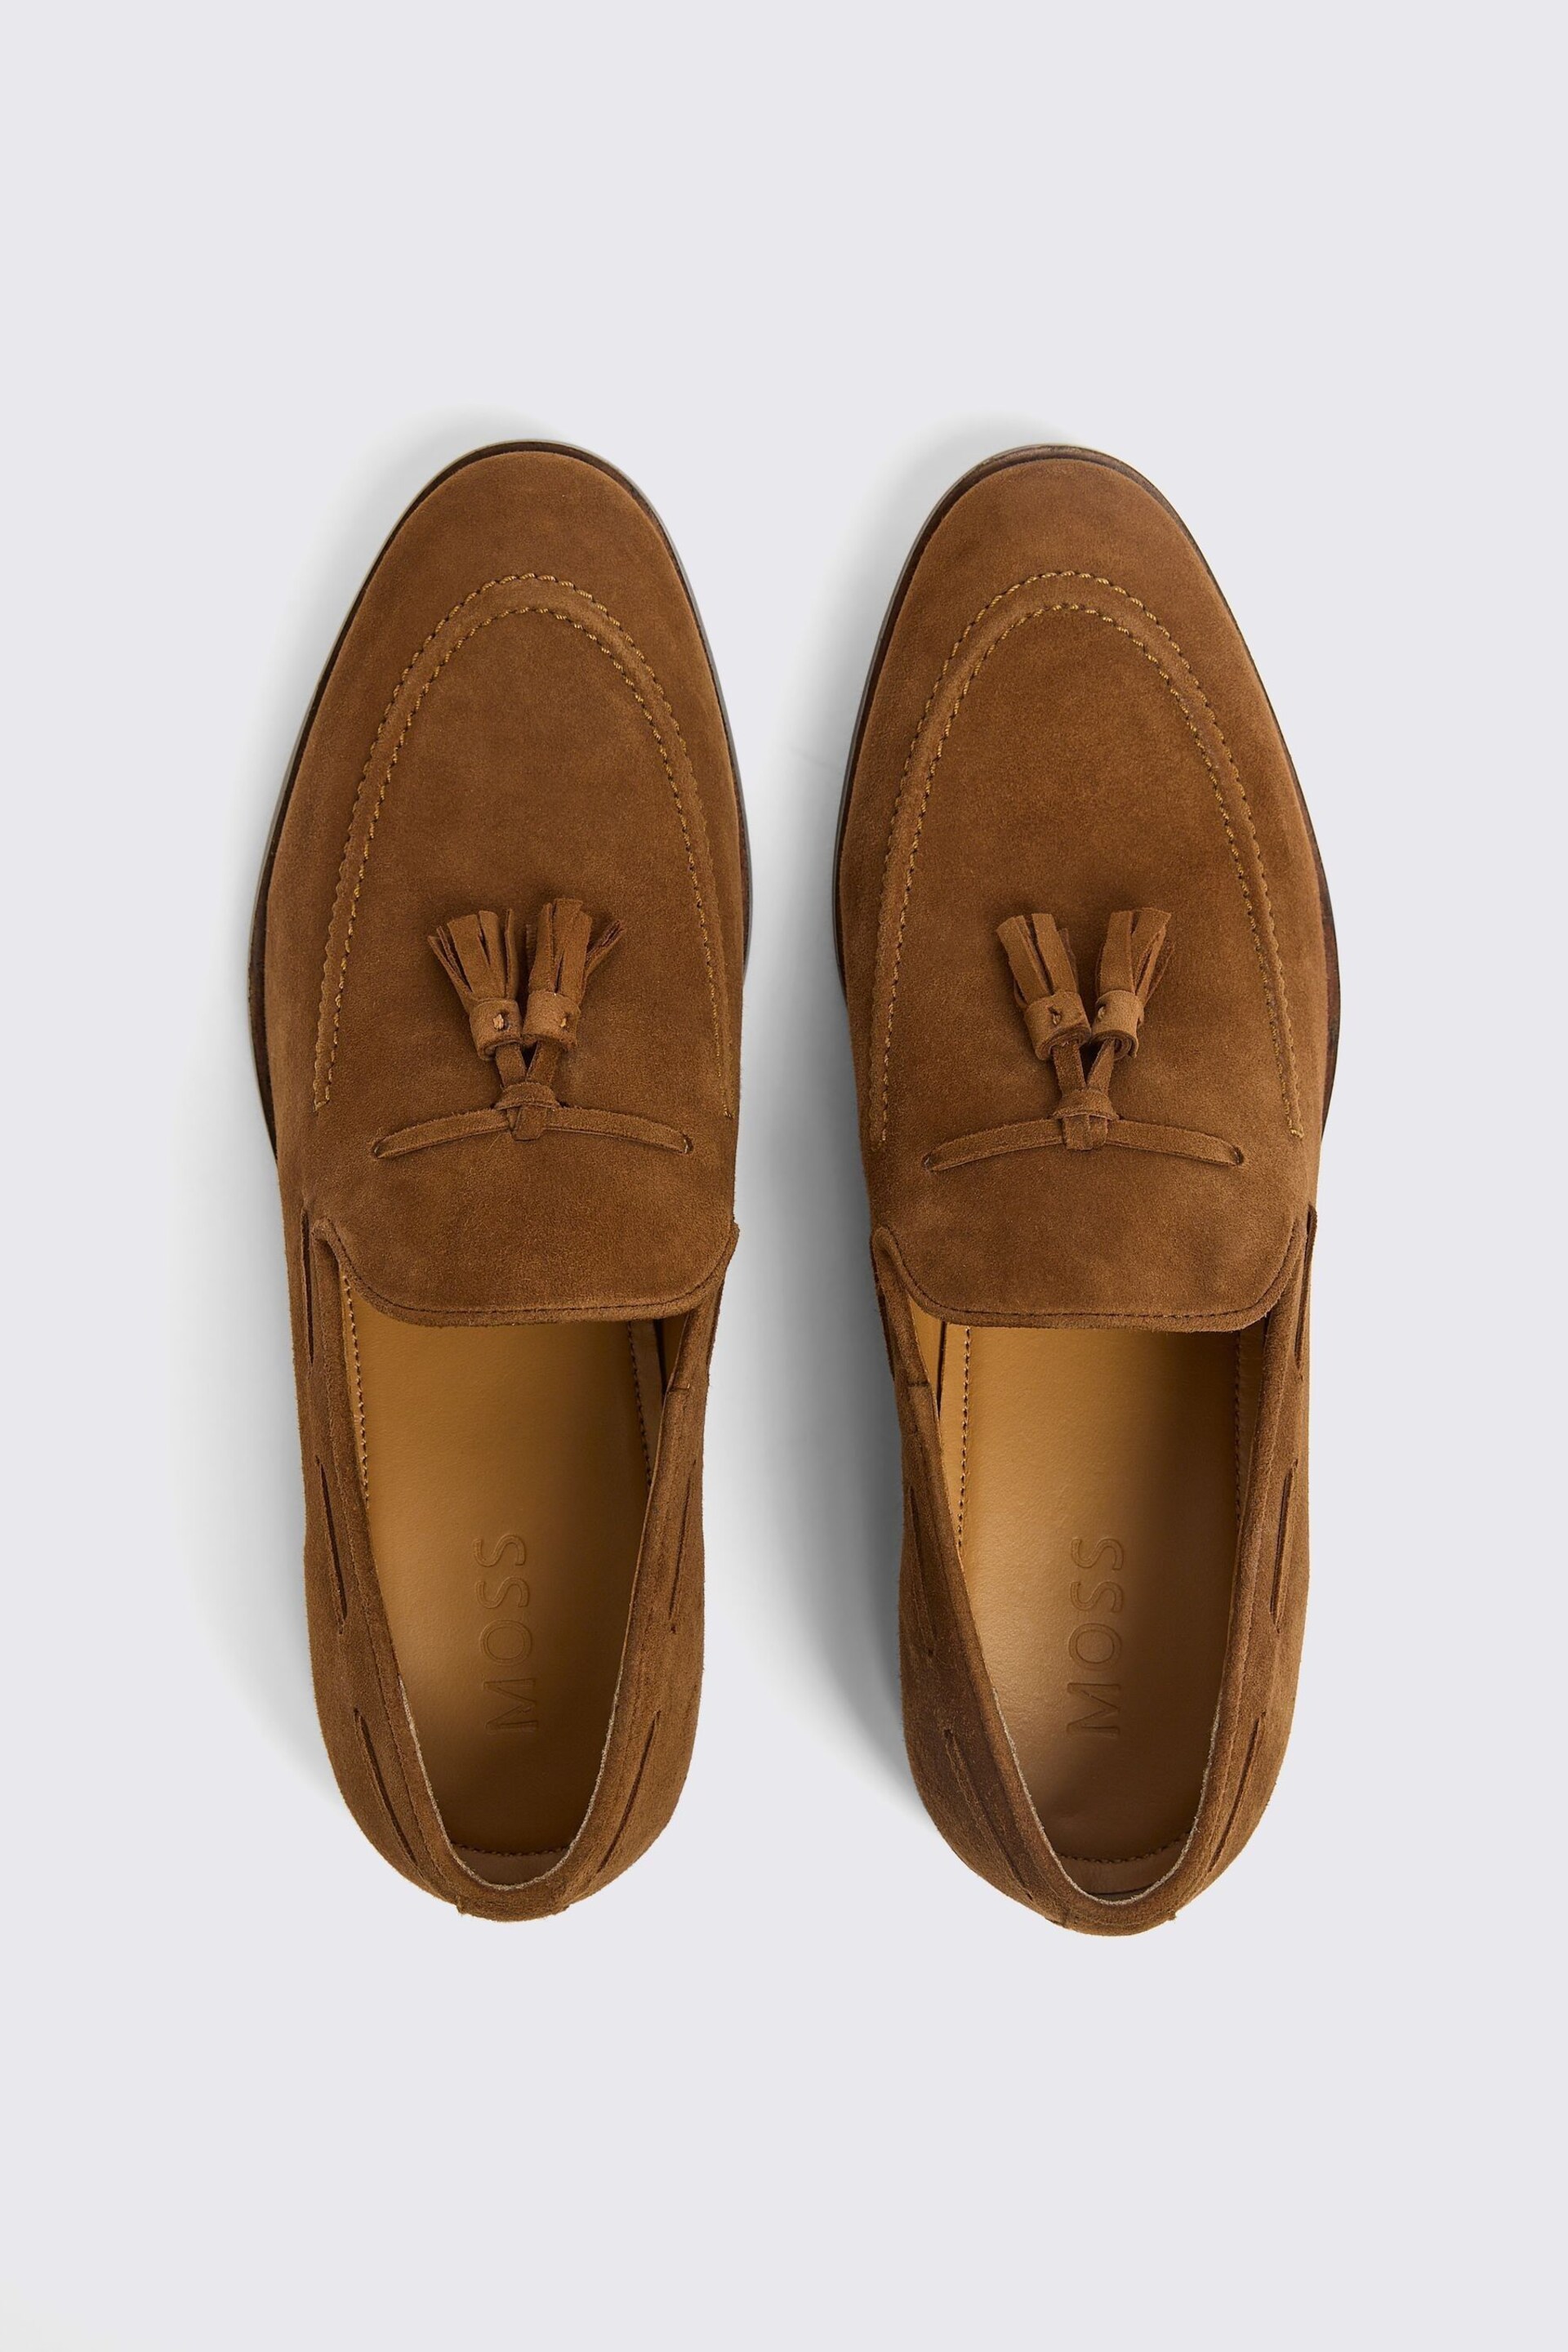 MOSS Tan Brown Highgate Suede Tassel Loafers - Image 4 of 5